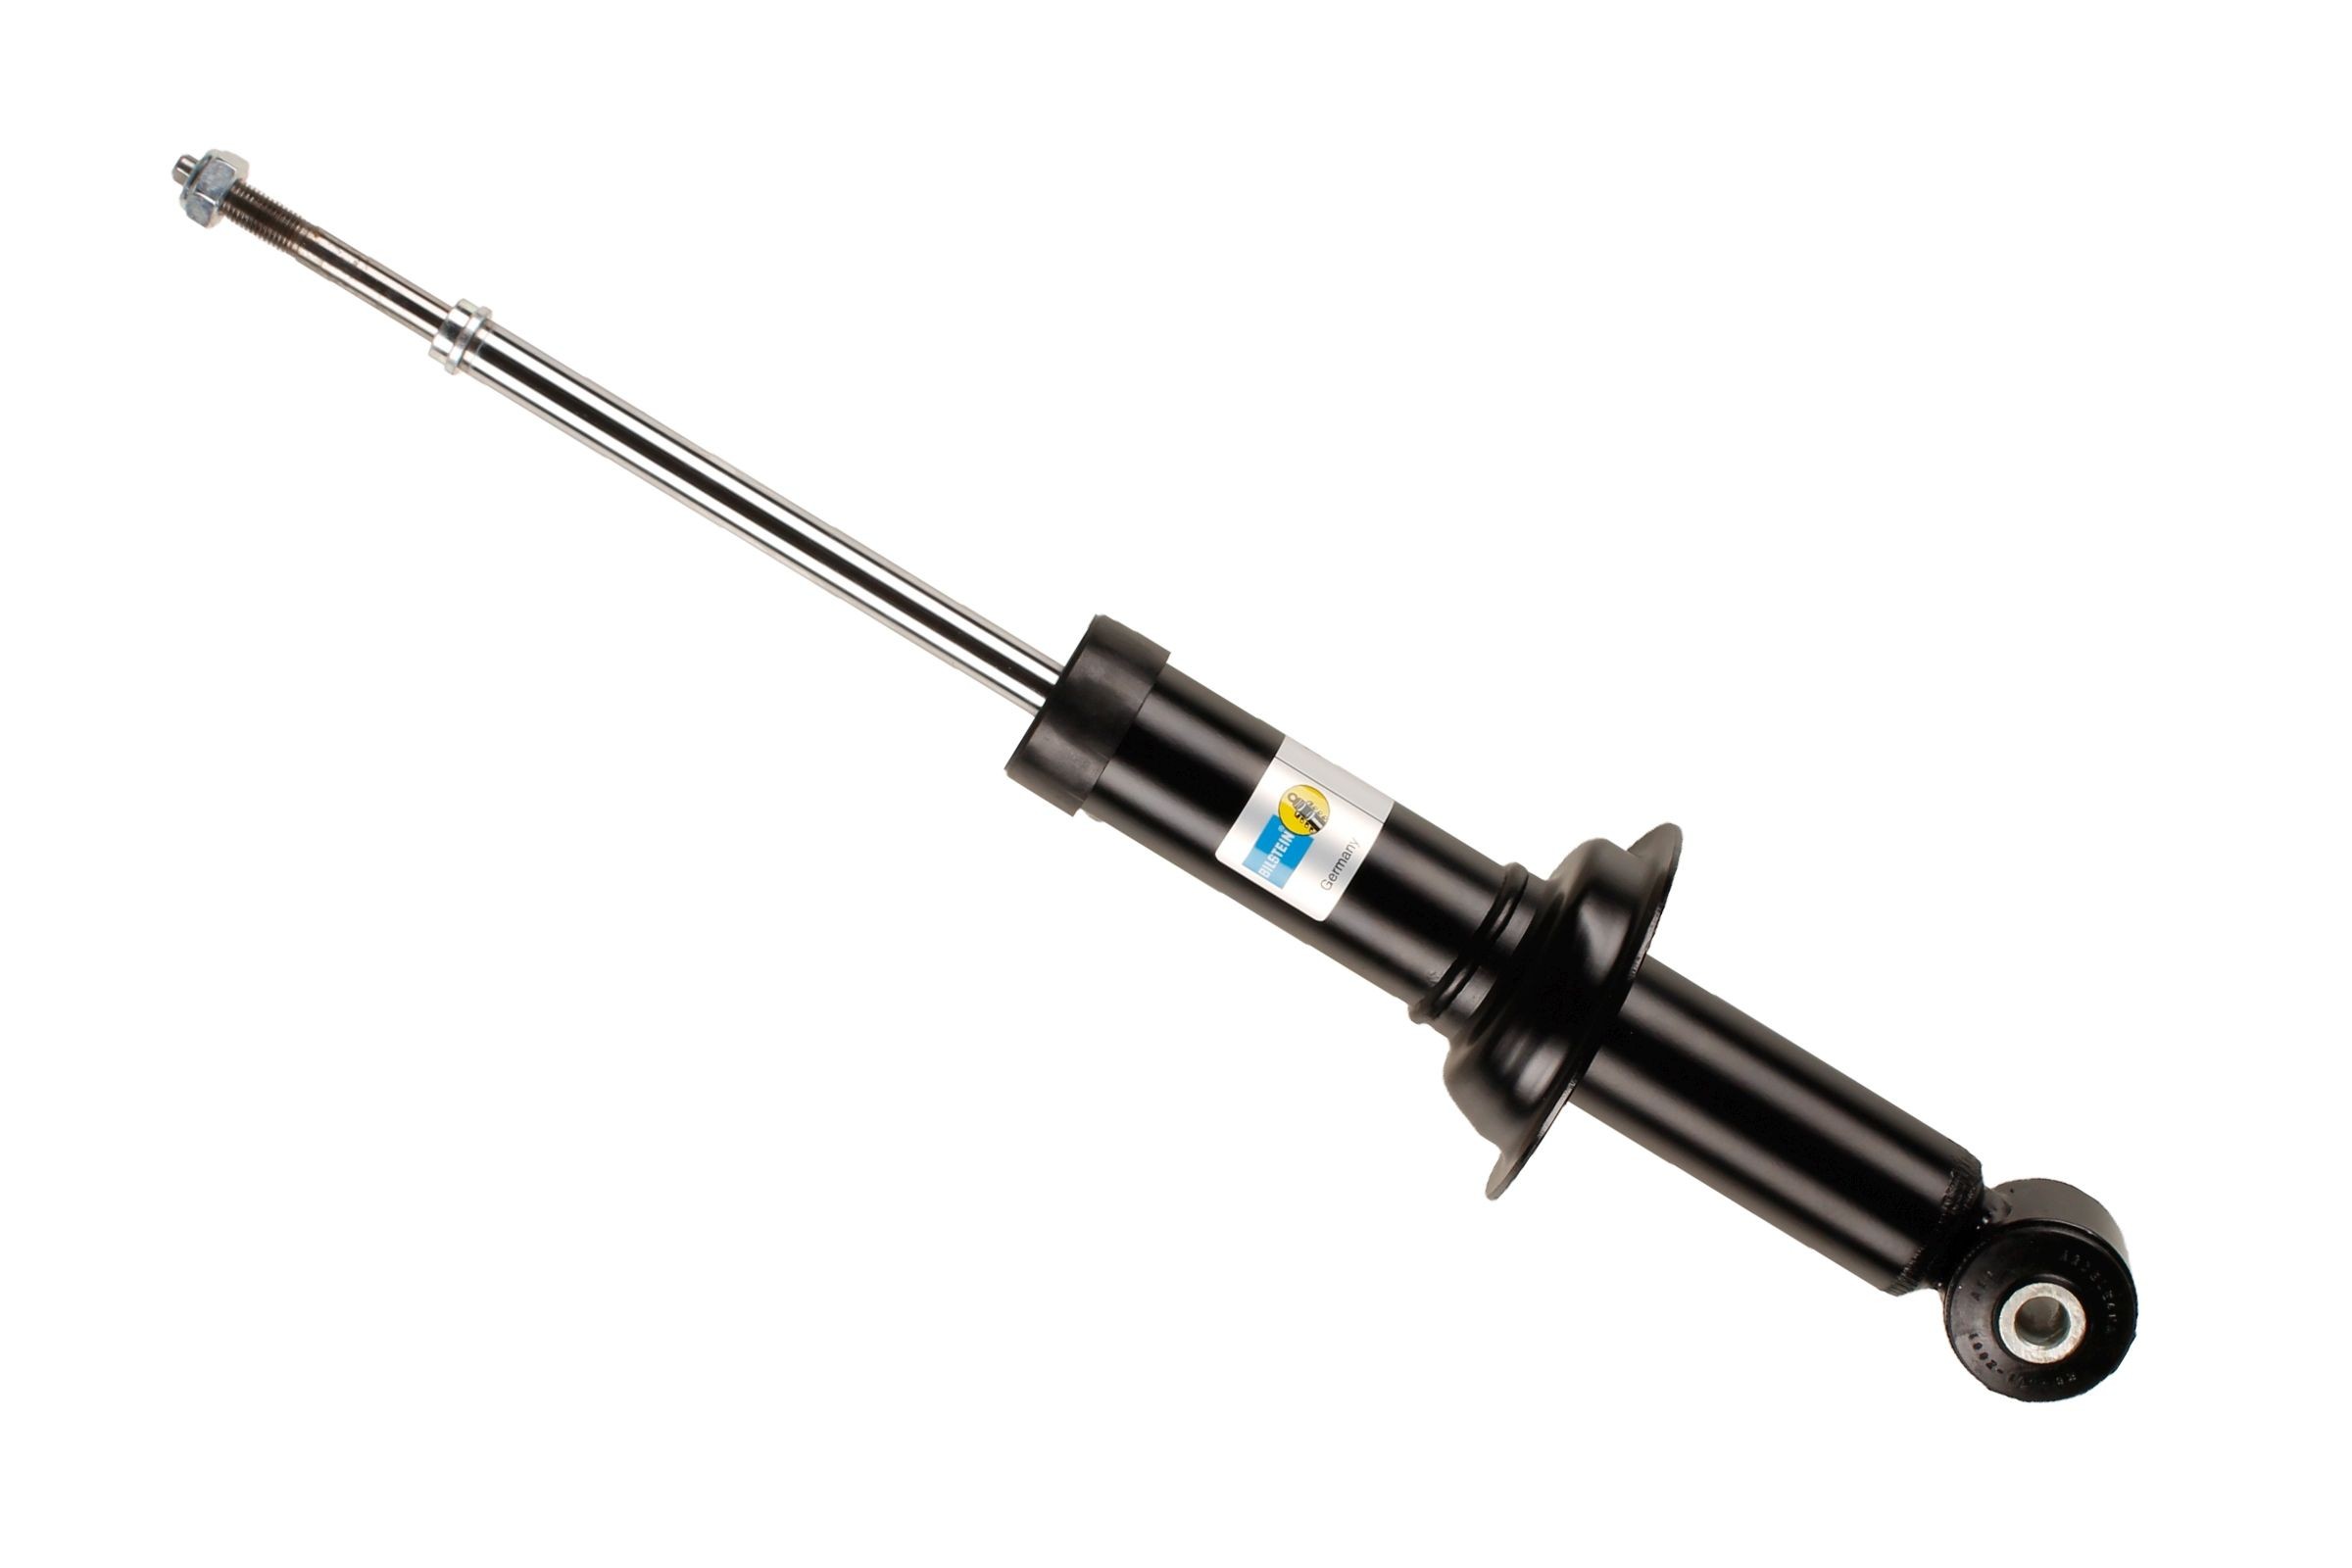 BILSTEIN - B4 OE Replacement 19-213859 Shock absorber Rear Axle, Gas Pressure, Twin-Tube, Absorber does not carry a spring, Bottom eye, Top pin